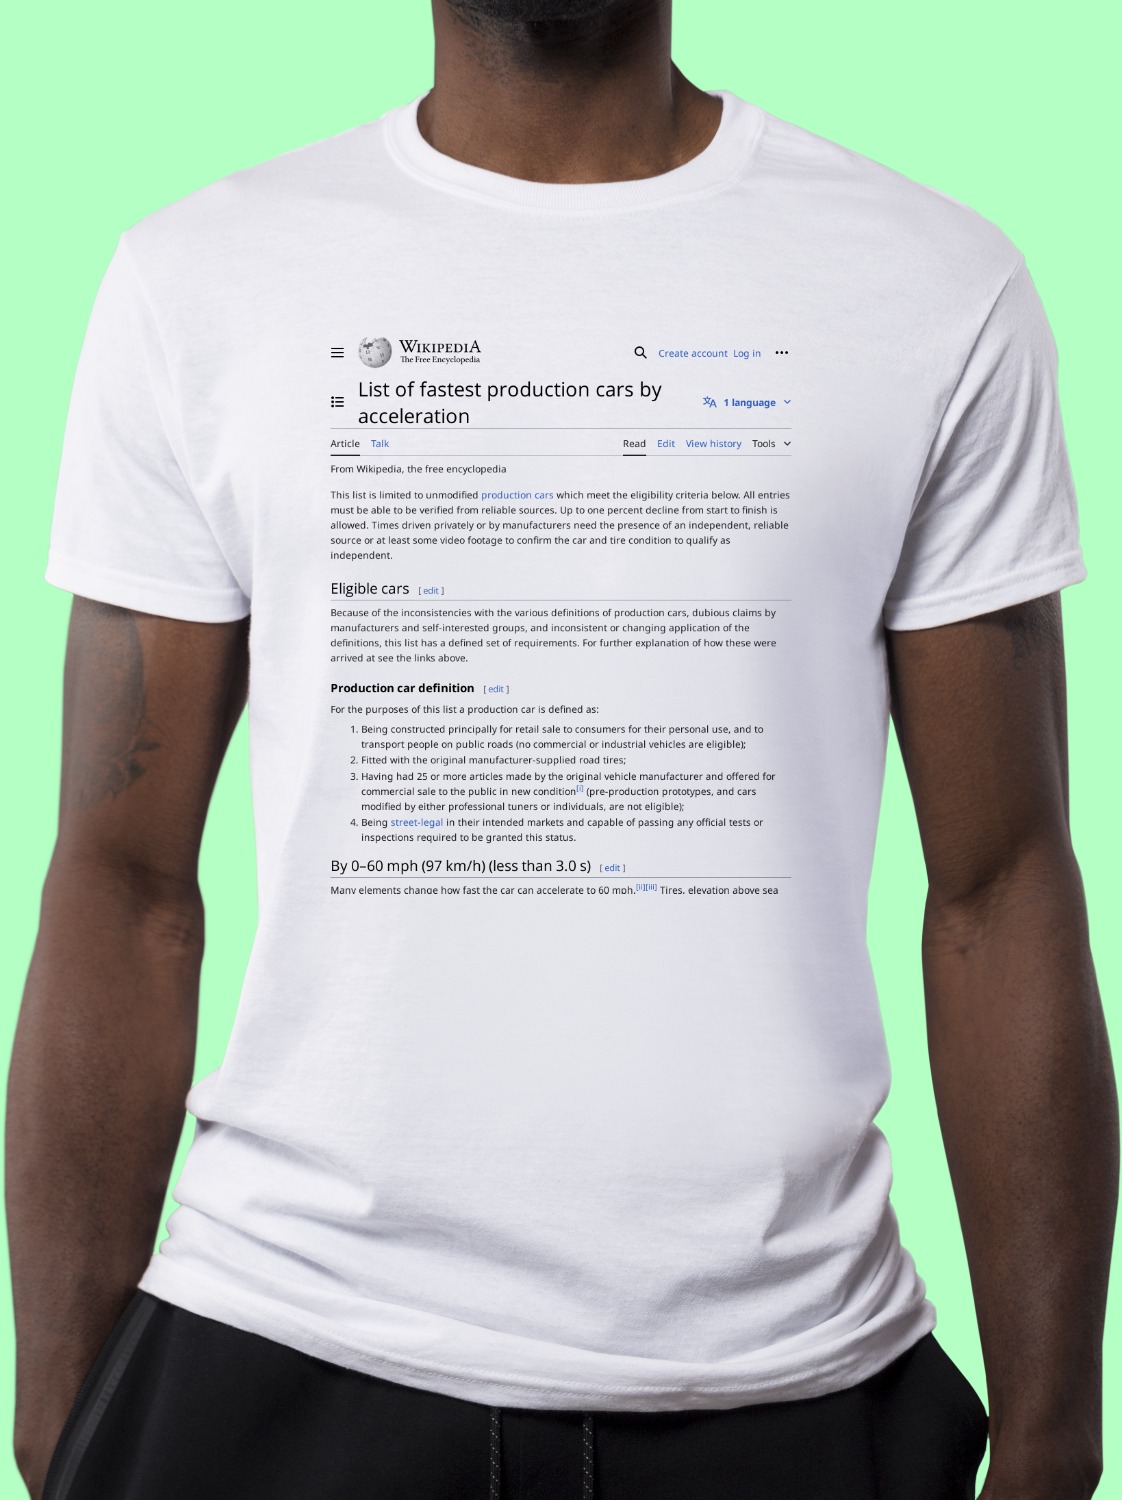 List_of_fastest_production_cars_by_acceleration Wikipedia Shirt